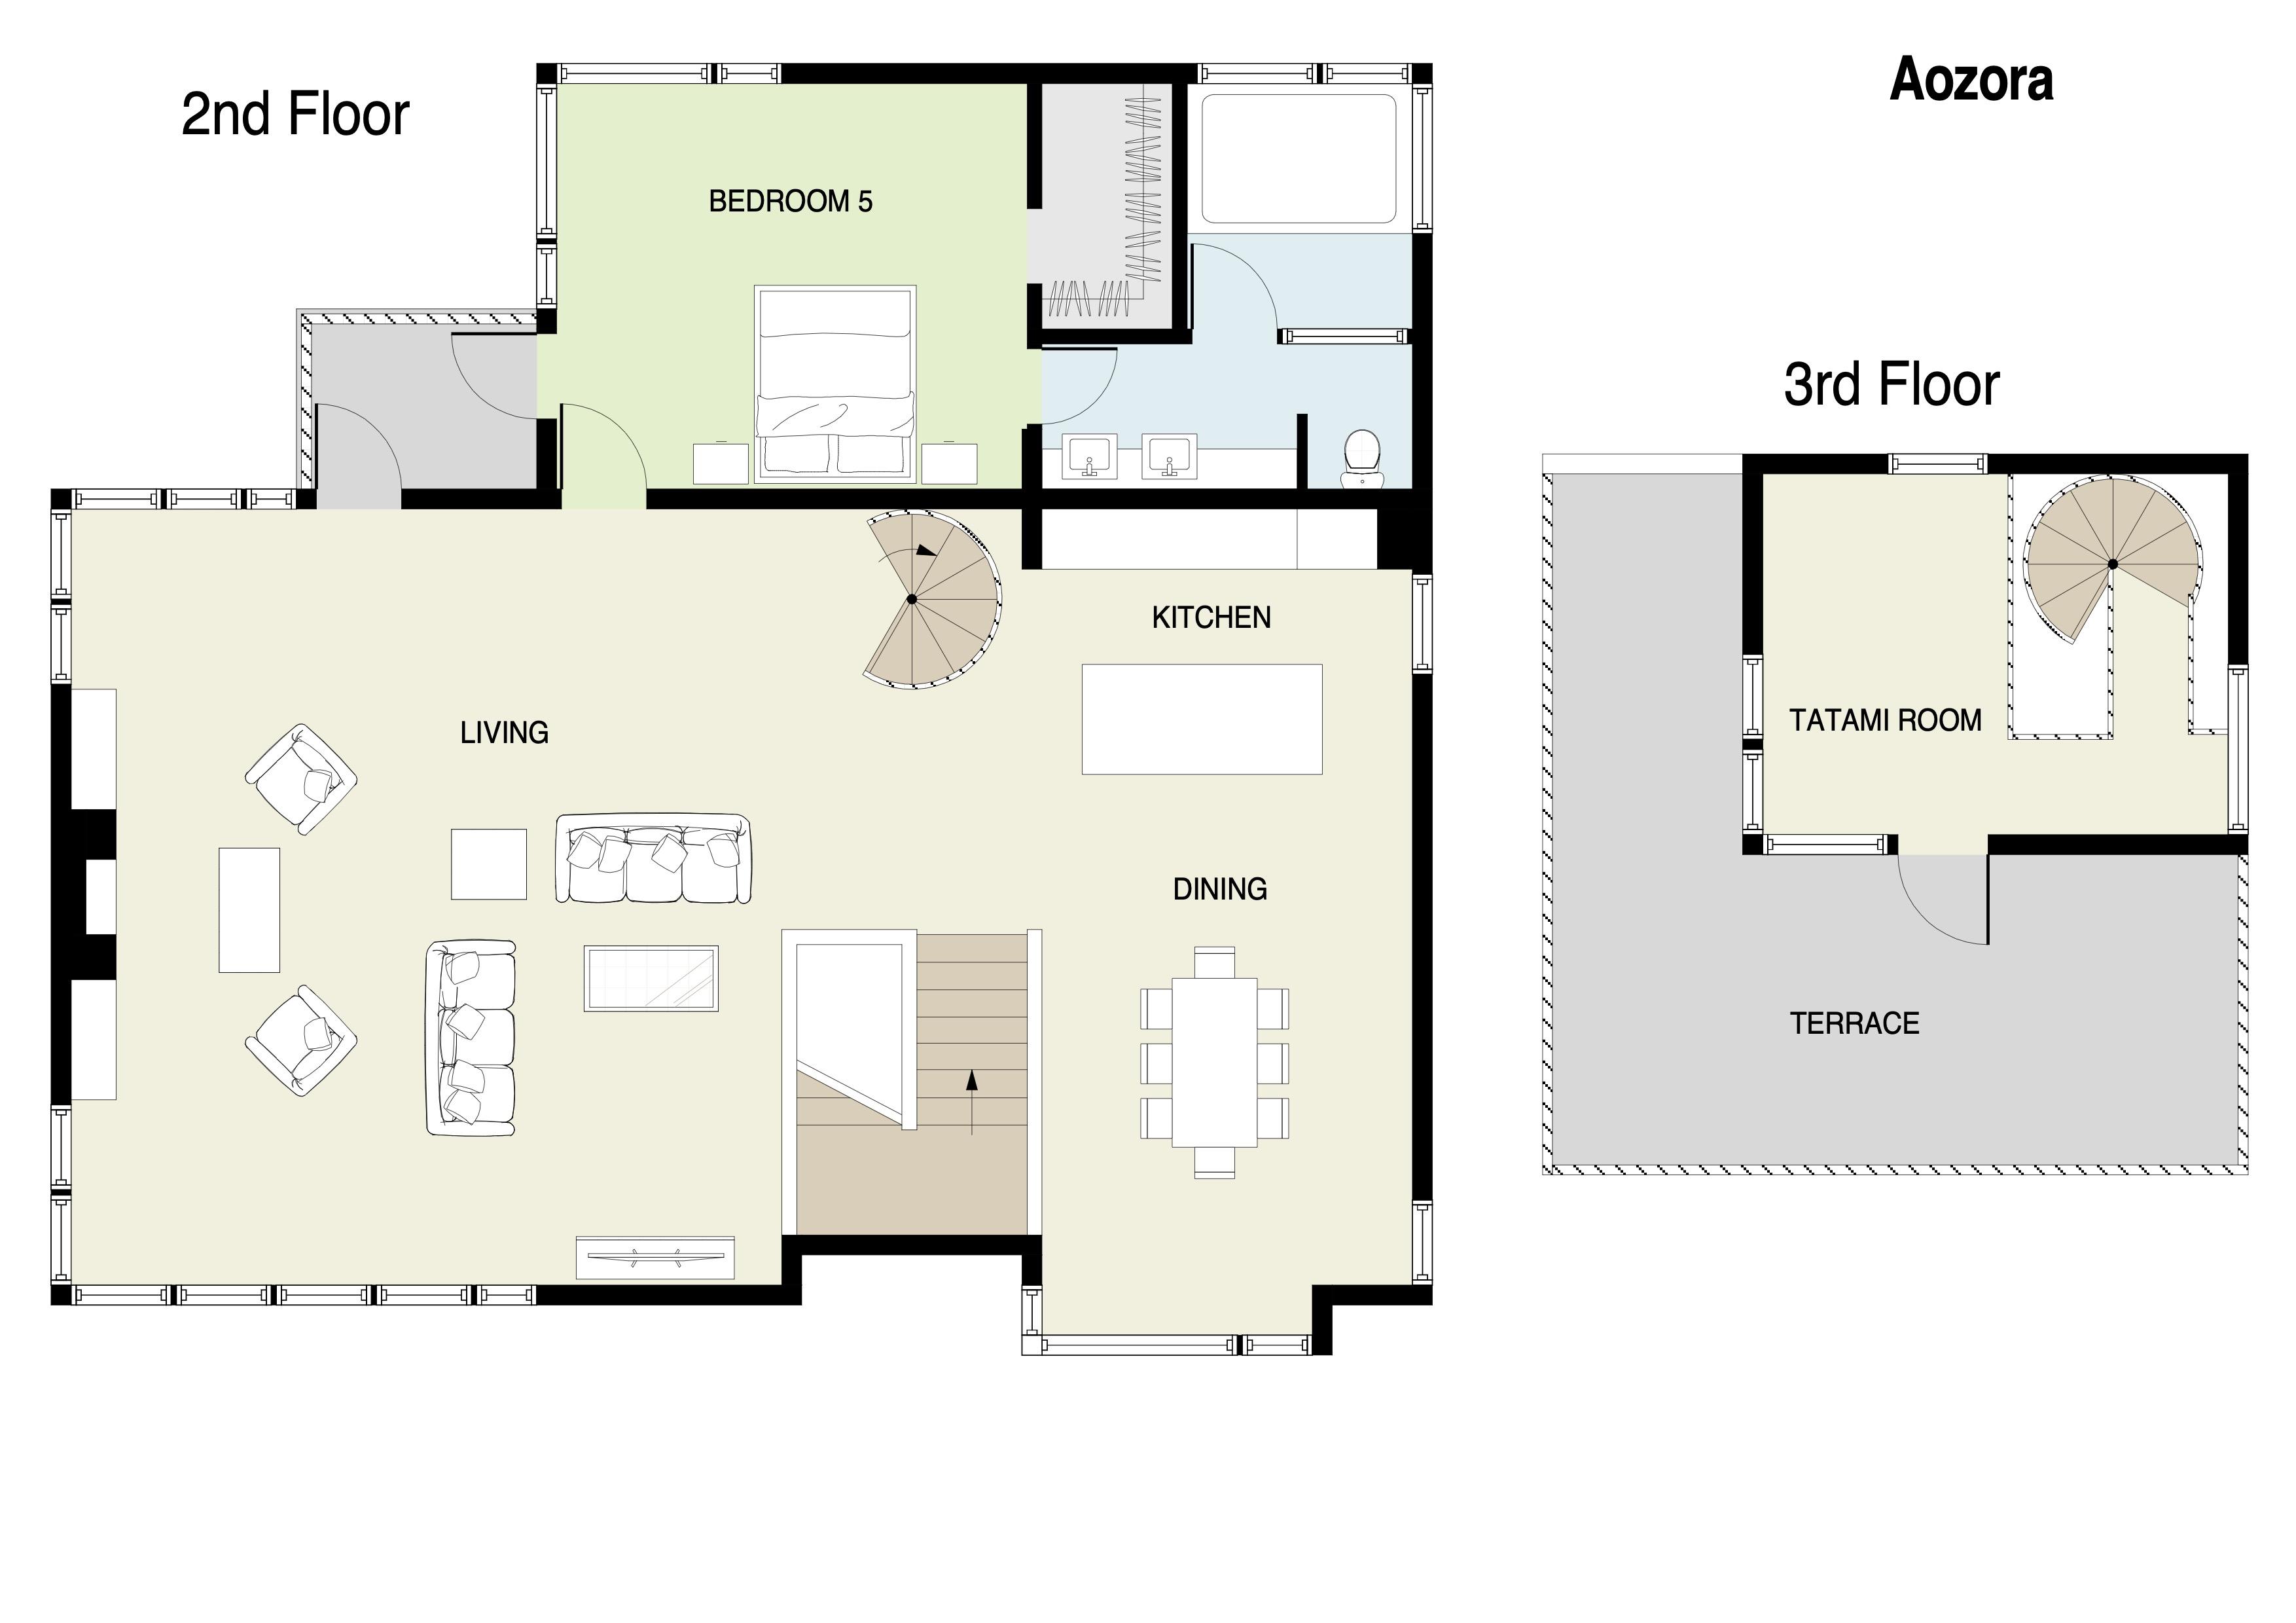 Aozora 2nd and 3rd Floor plans